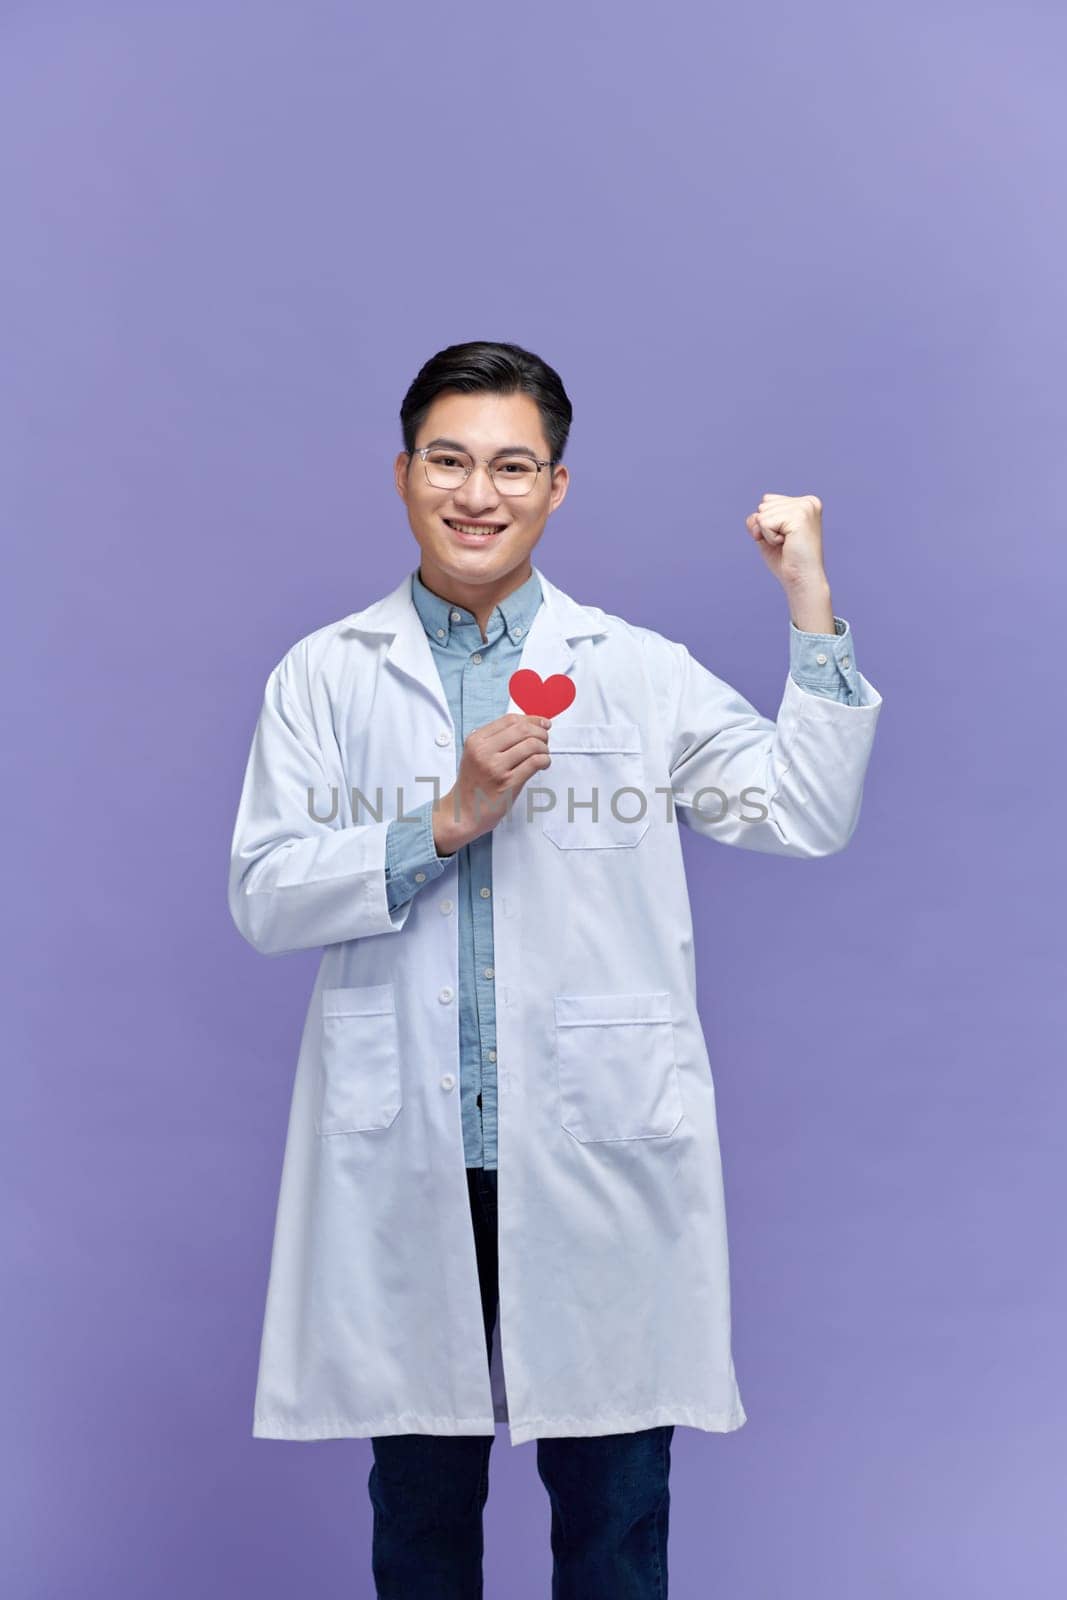 doctor man holding red heart at the clinic screaming proud with raised arm